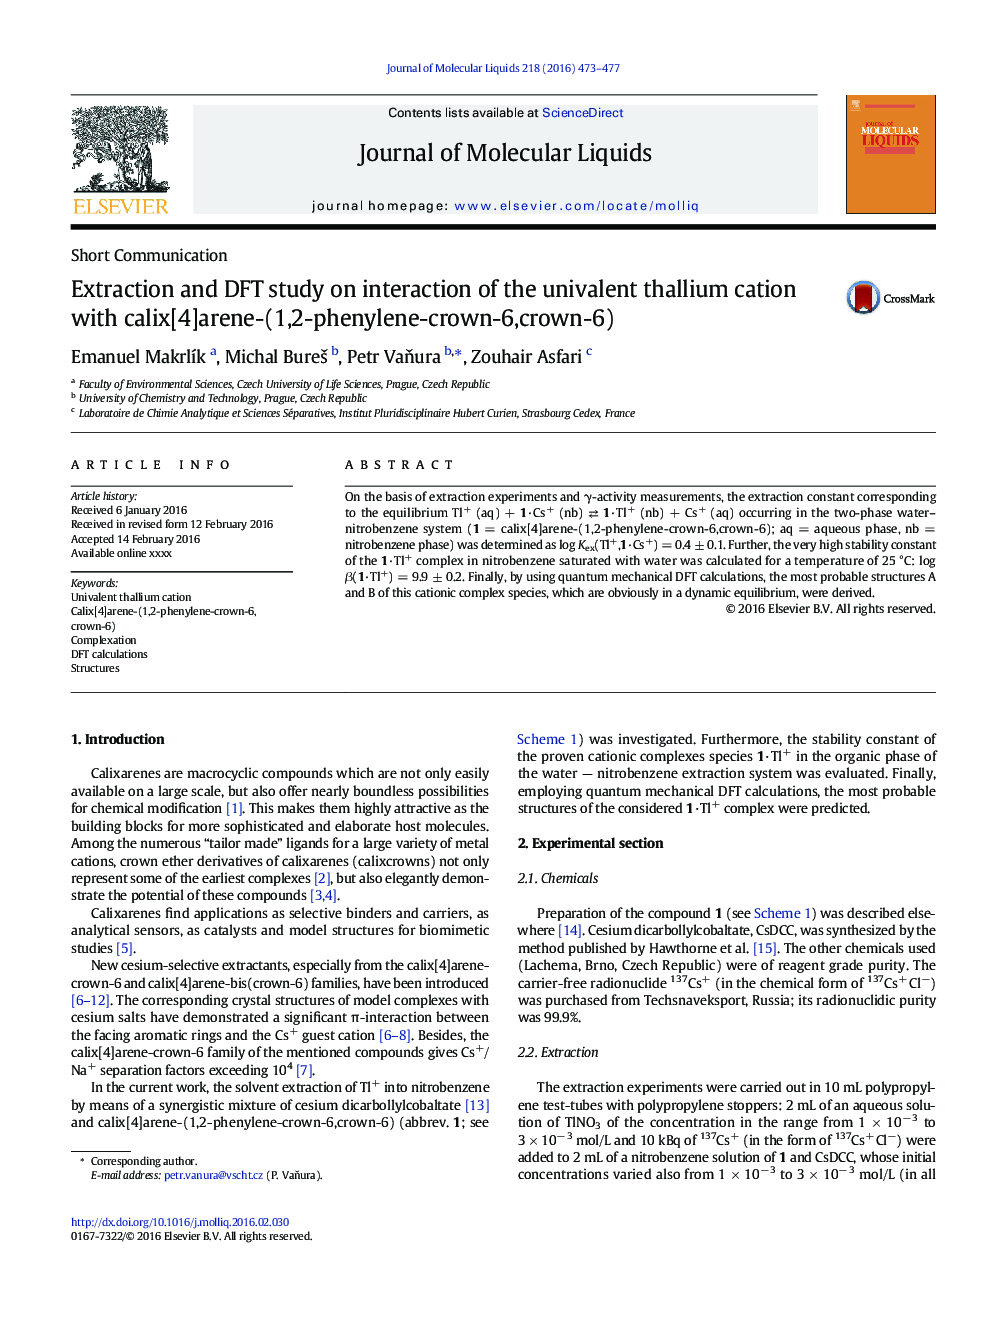 Extraction and DFT study on interaction of the univalent thallium cation with calix[4]arene-(1,2-phenylene-crown-6,crown-6)